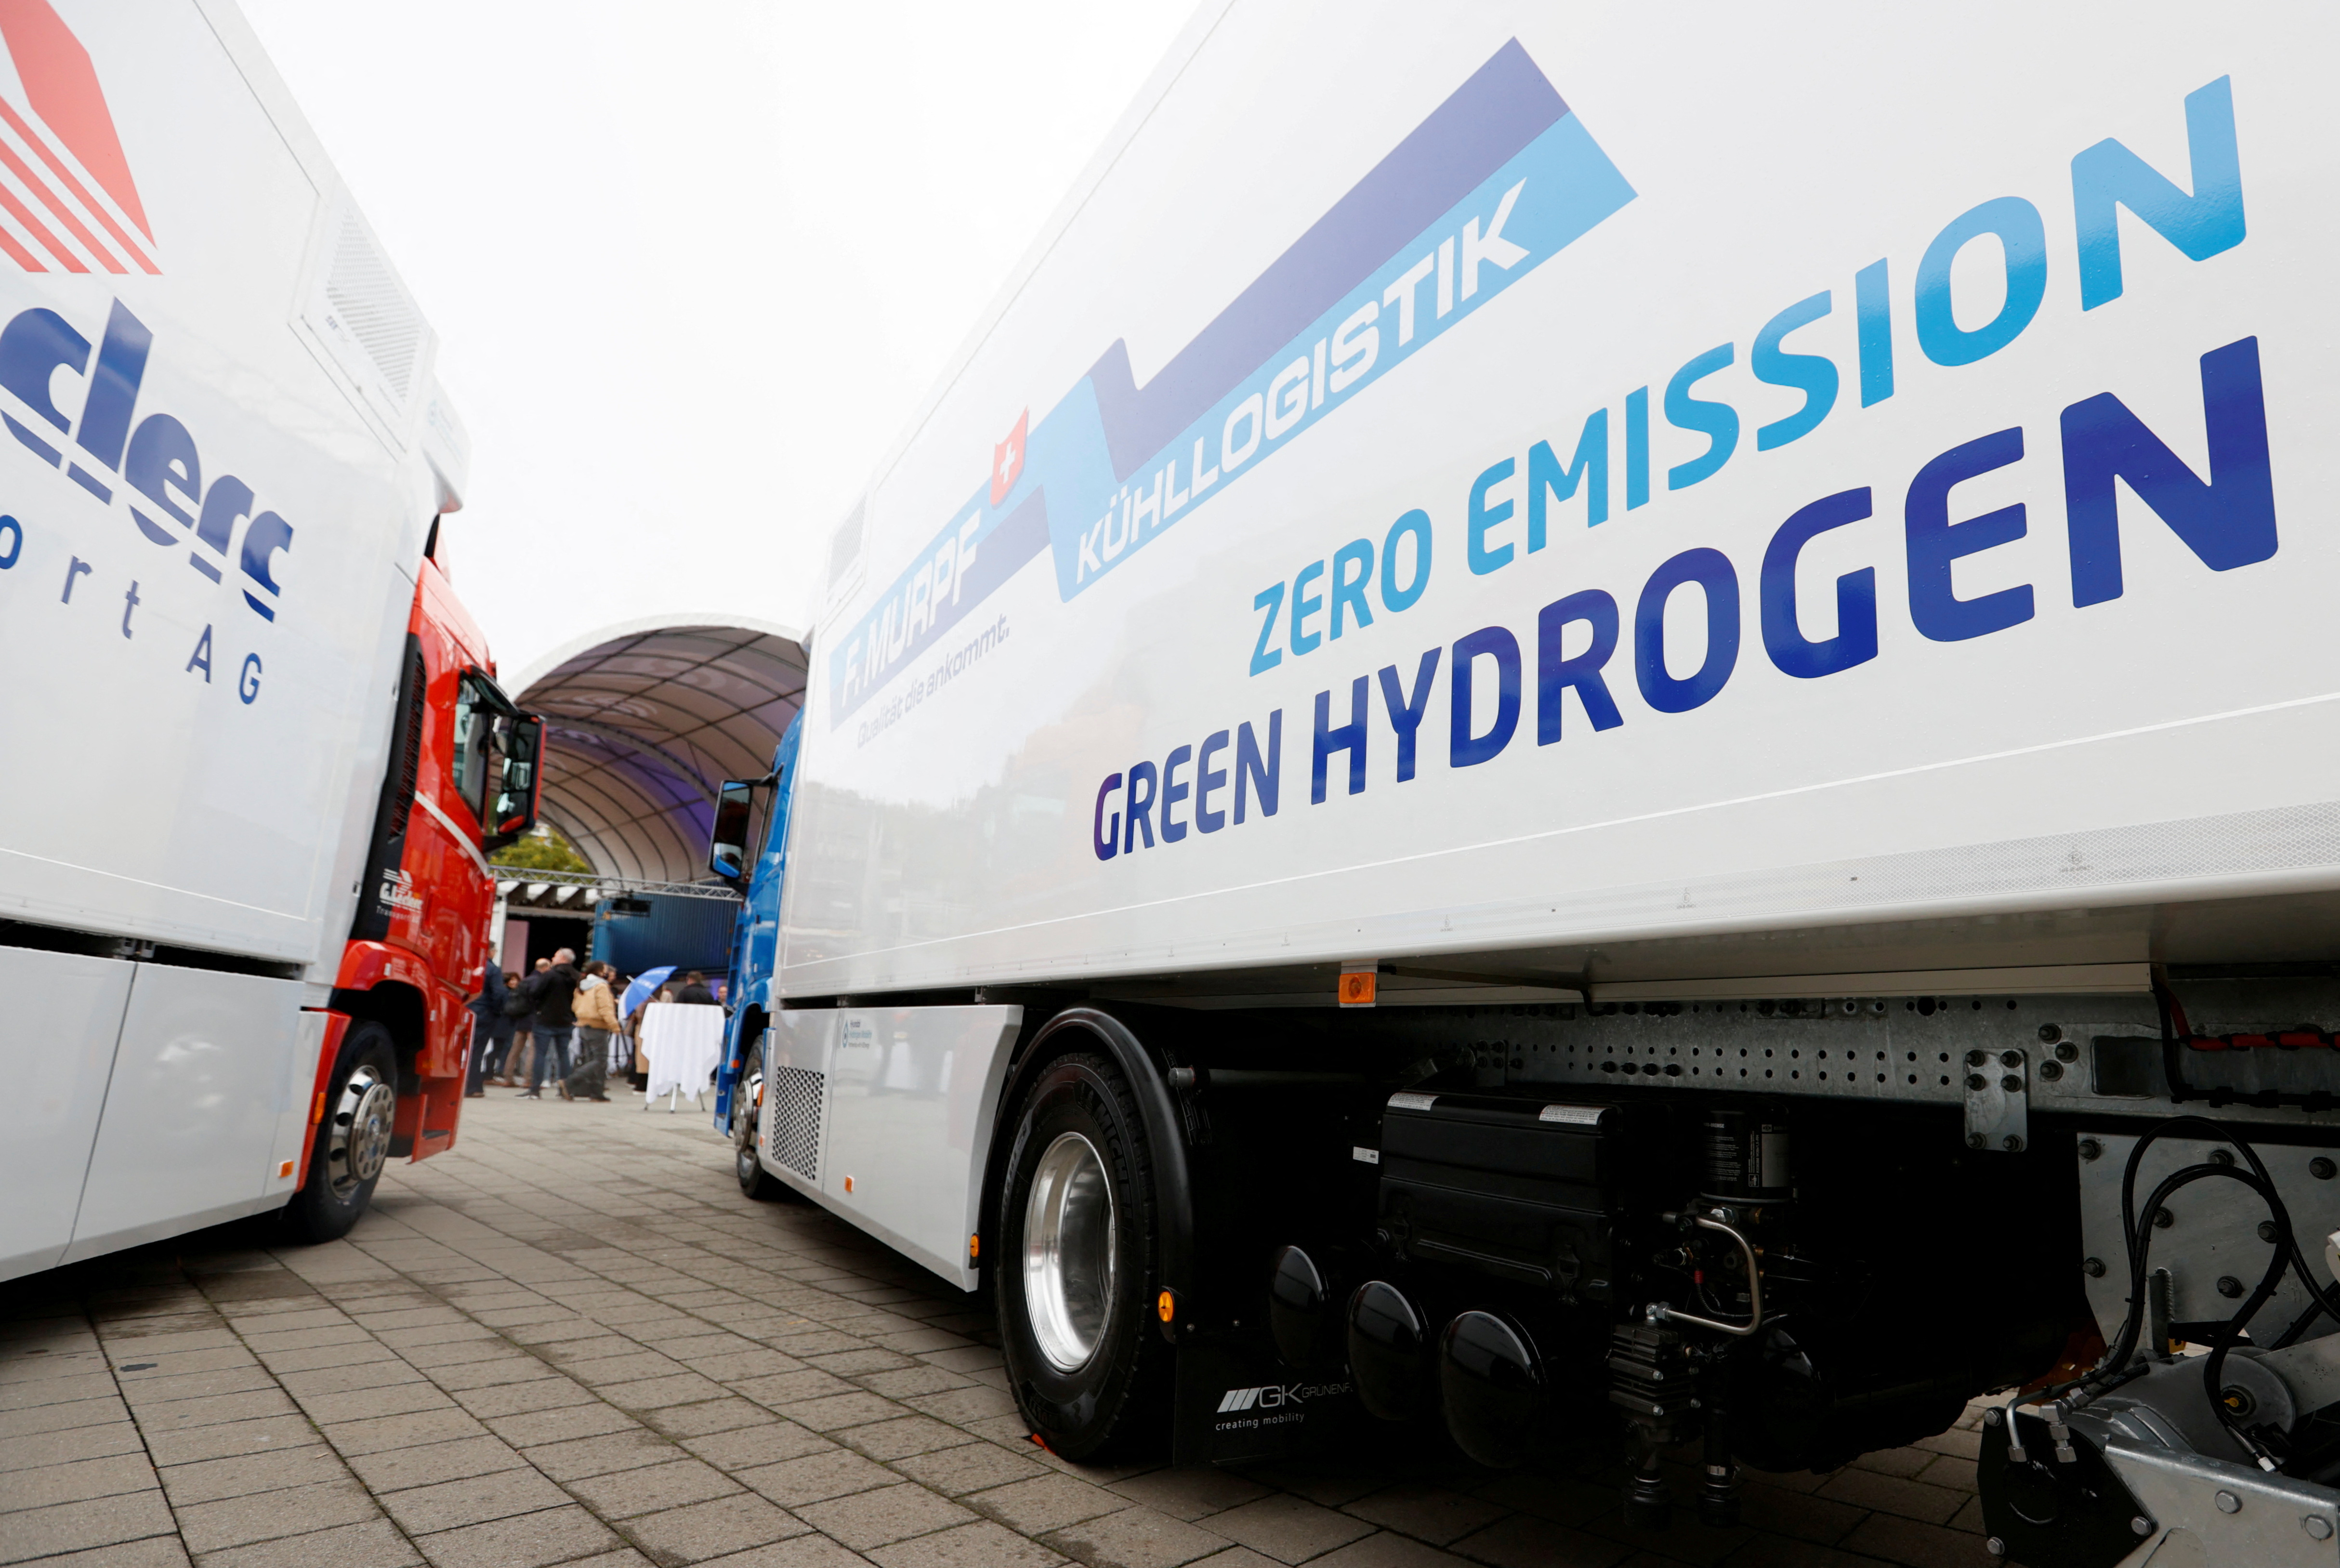 New hydrogen fuel cell truck made by Hyundai is displayed in Luzern